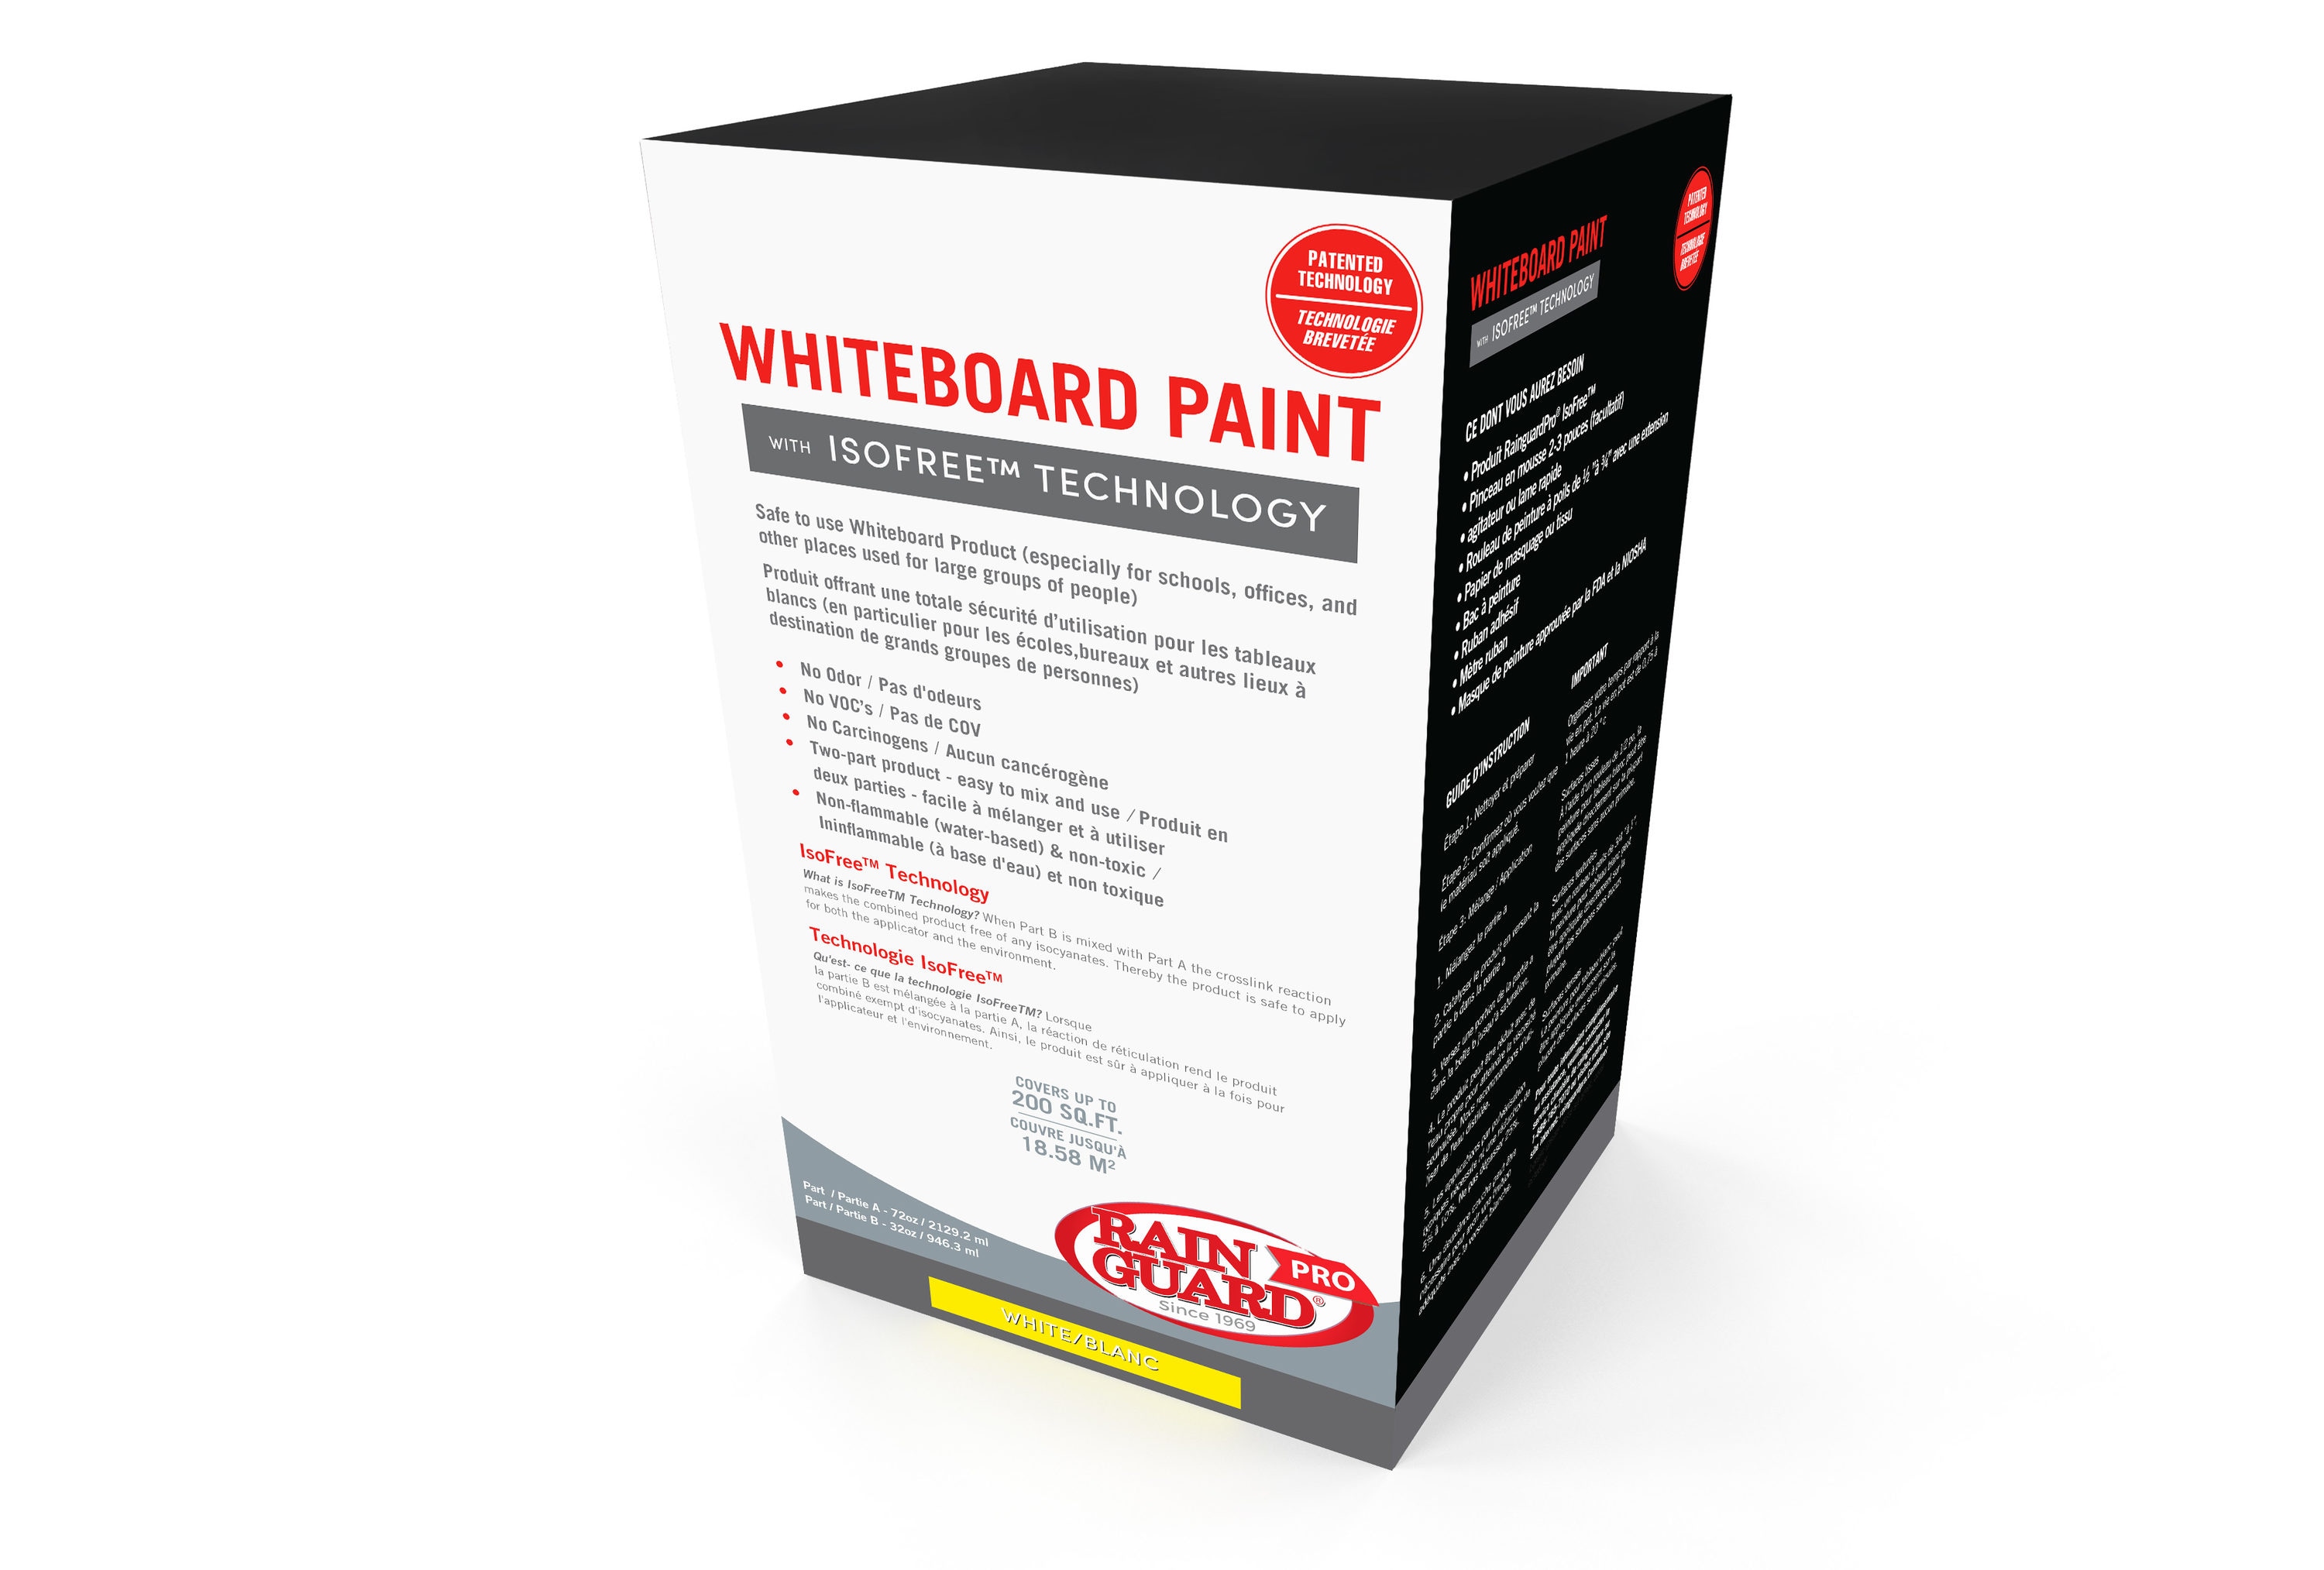 Buy Whiteboard paint that comes with extream customer service